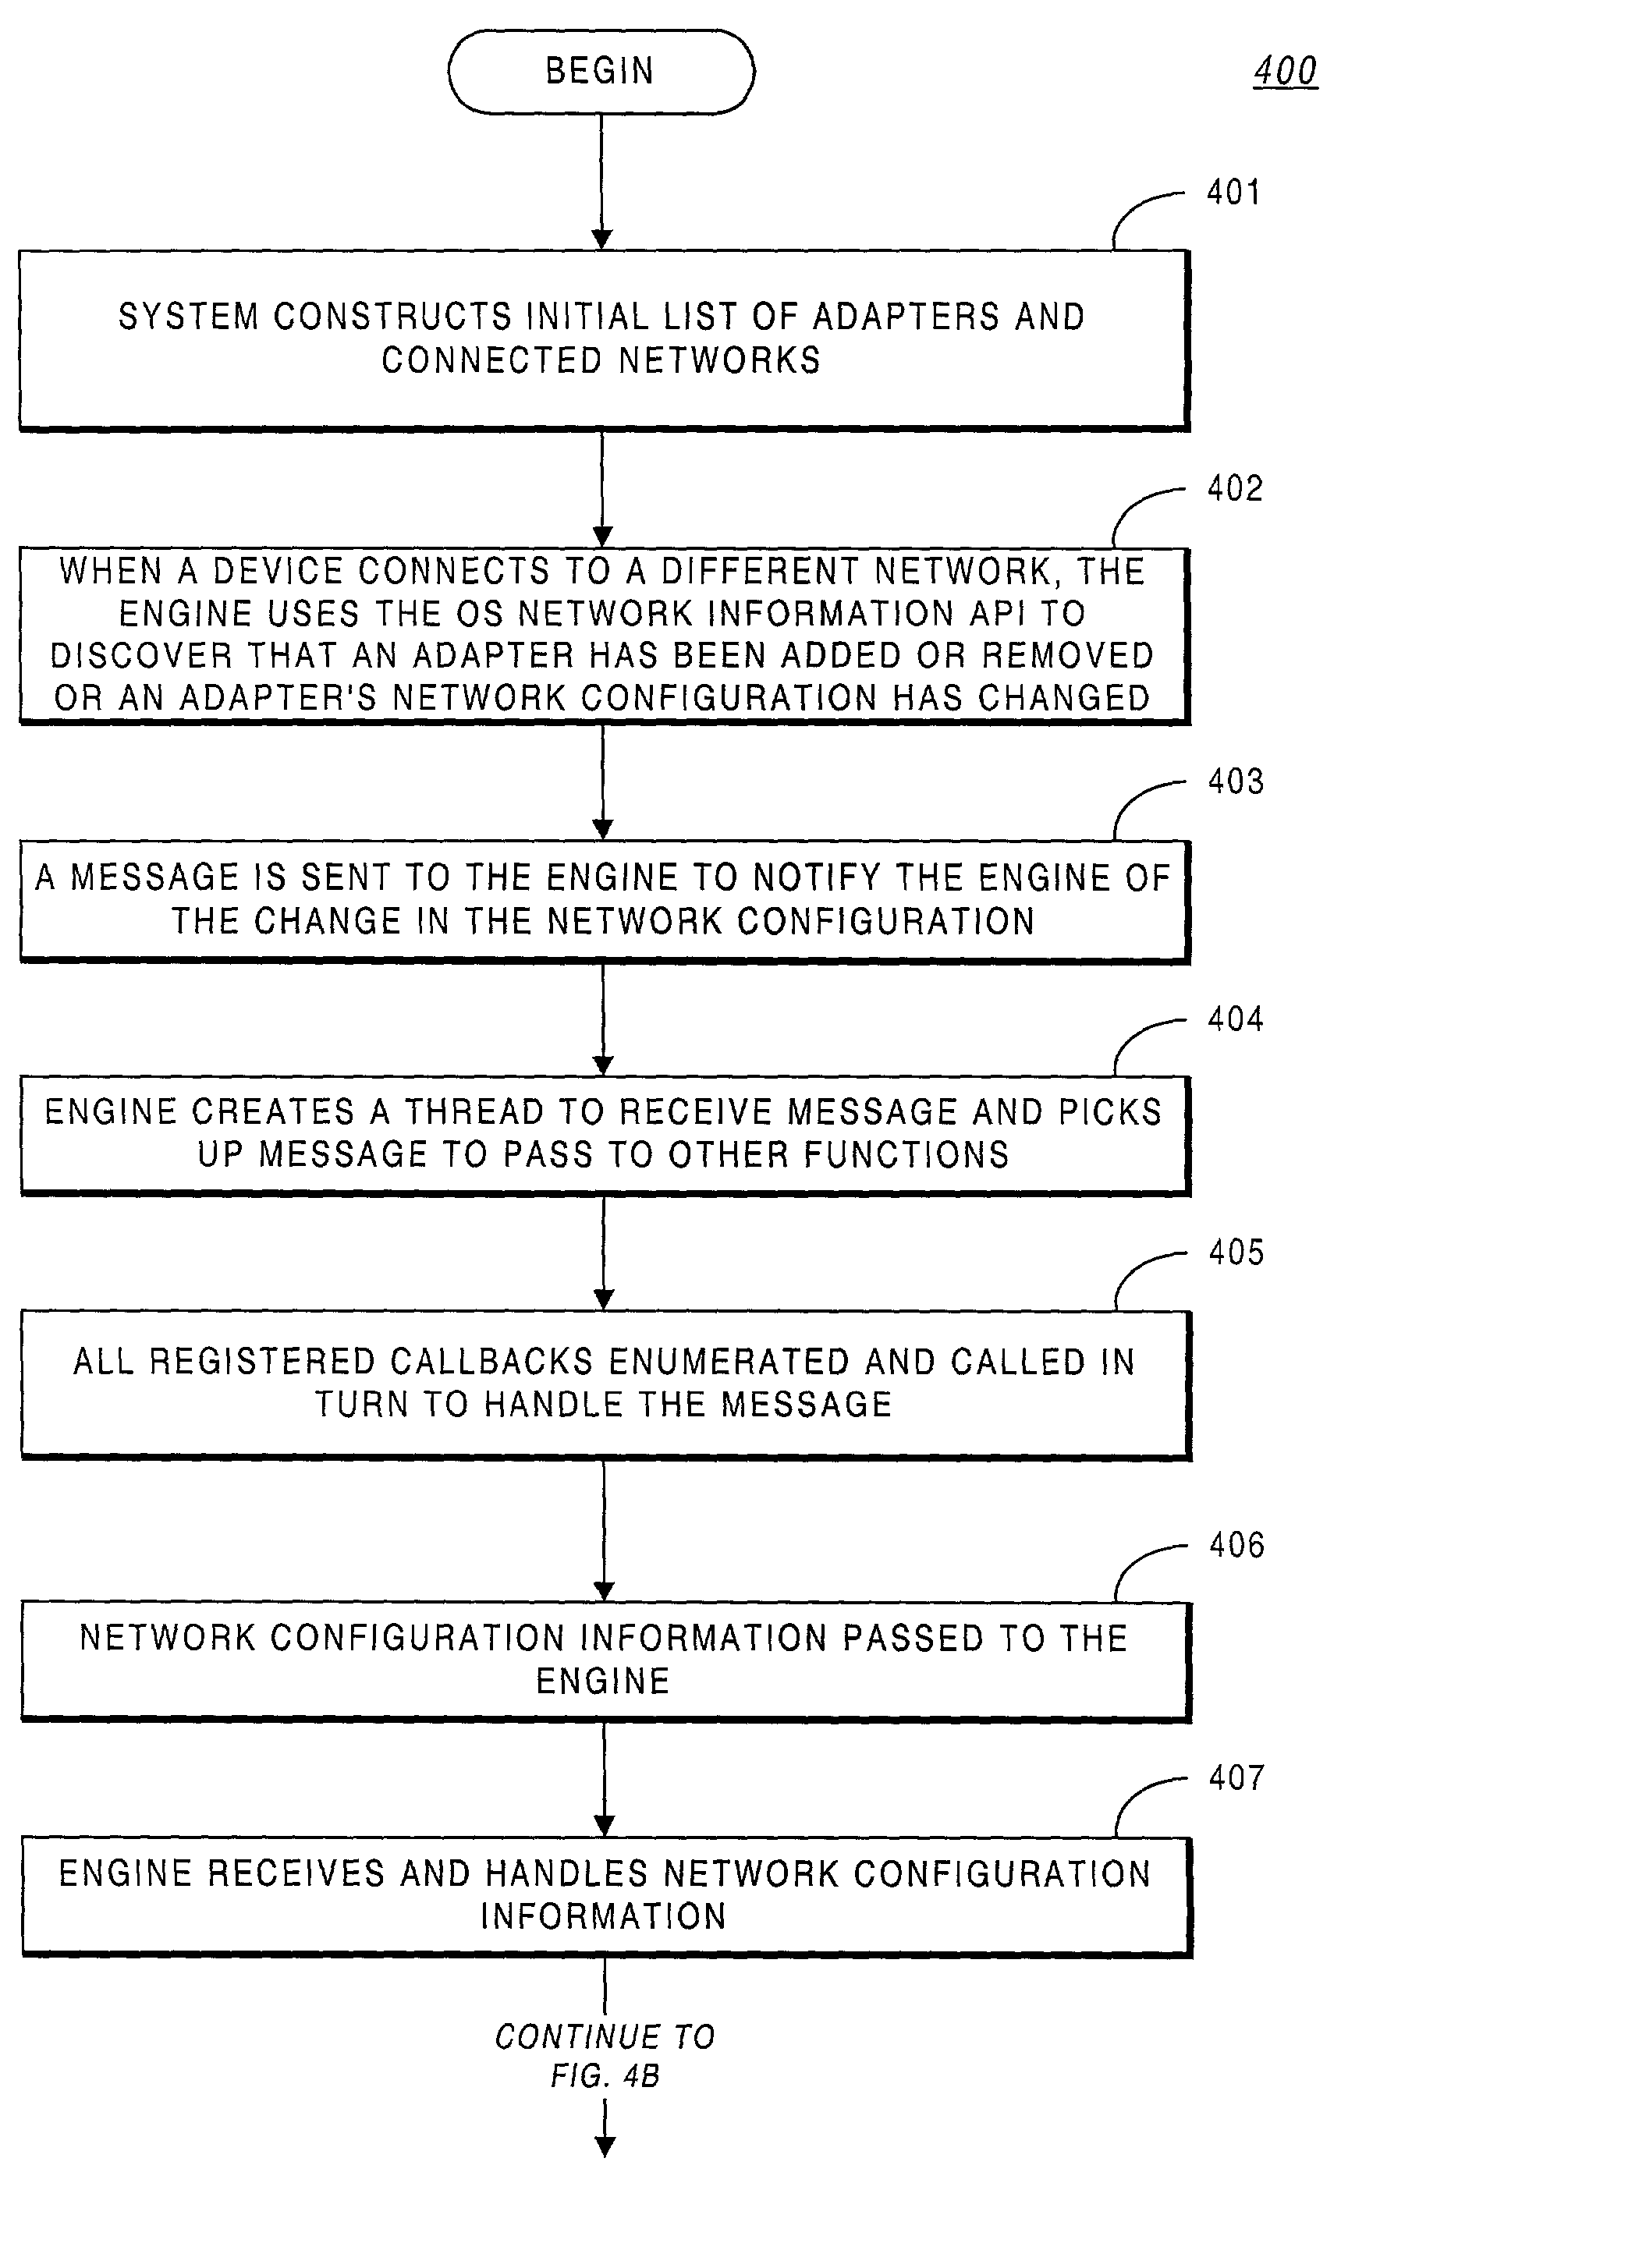 System methodology for automatic local network discovery and firewall reconfiguration for mobile computing devices